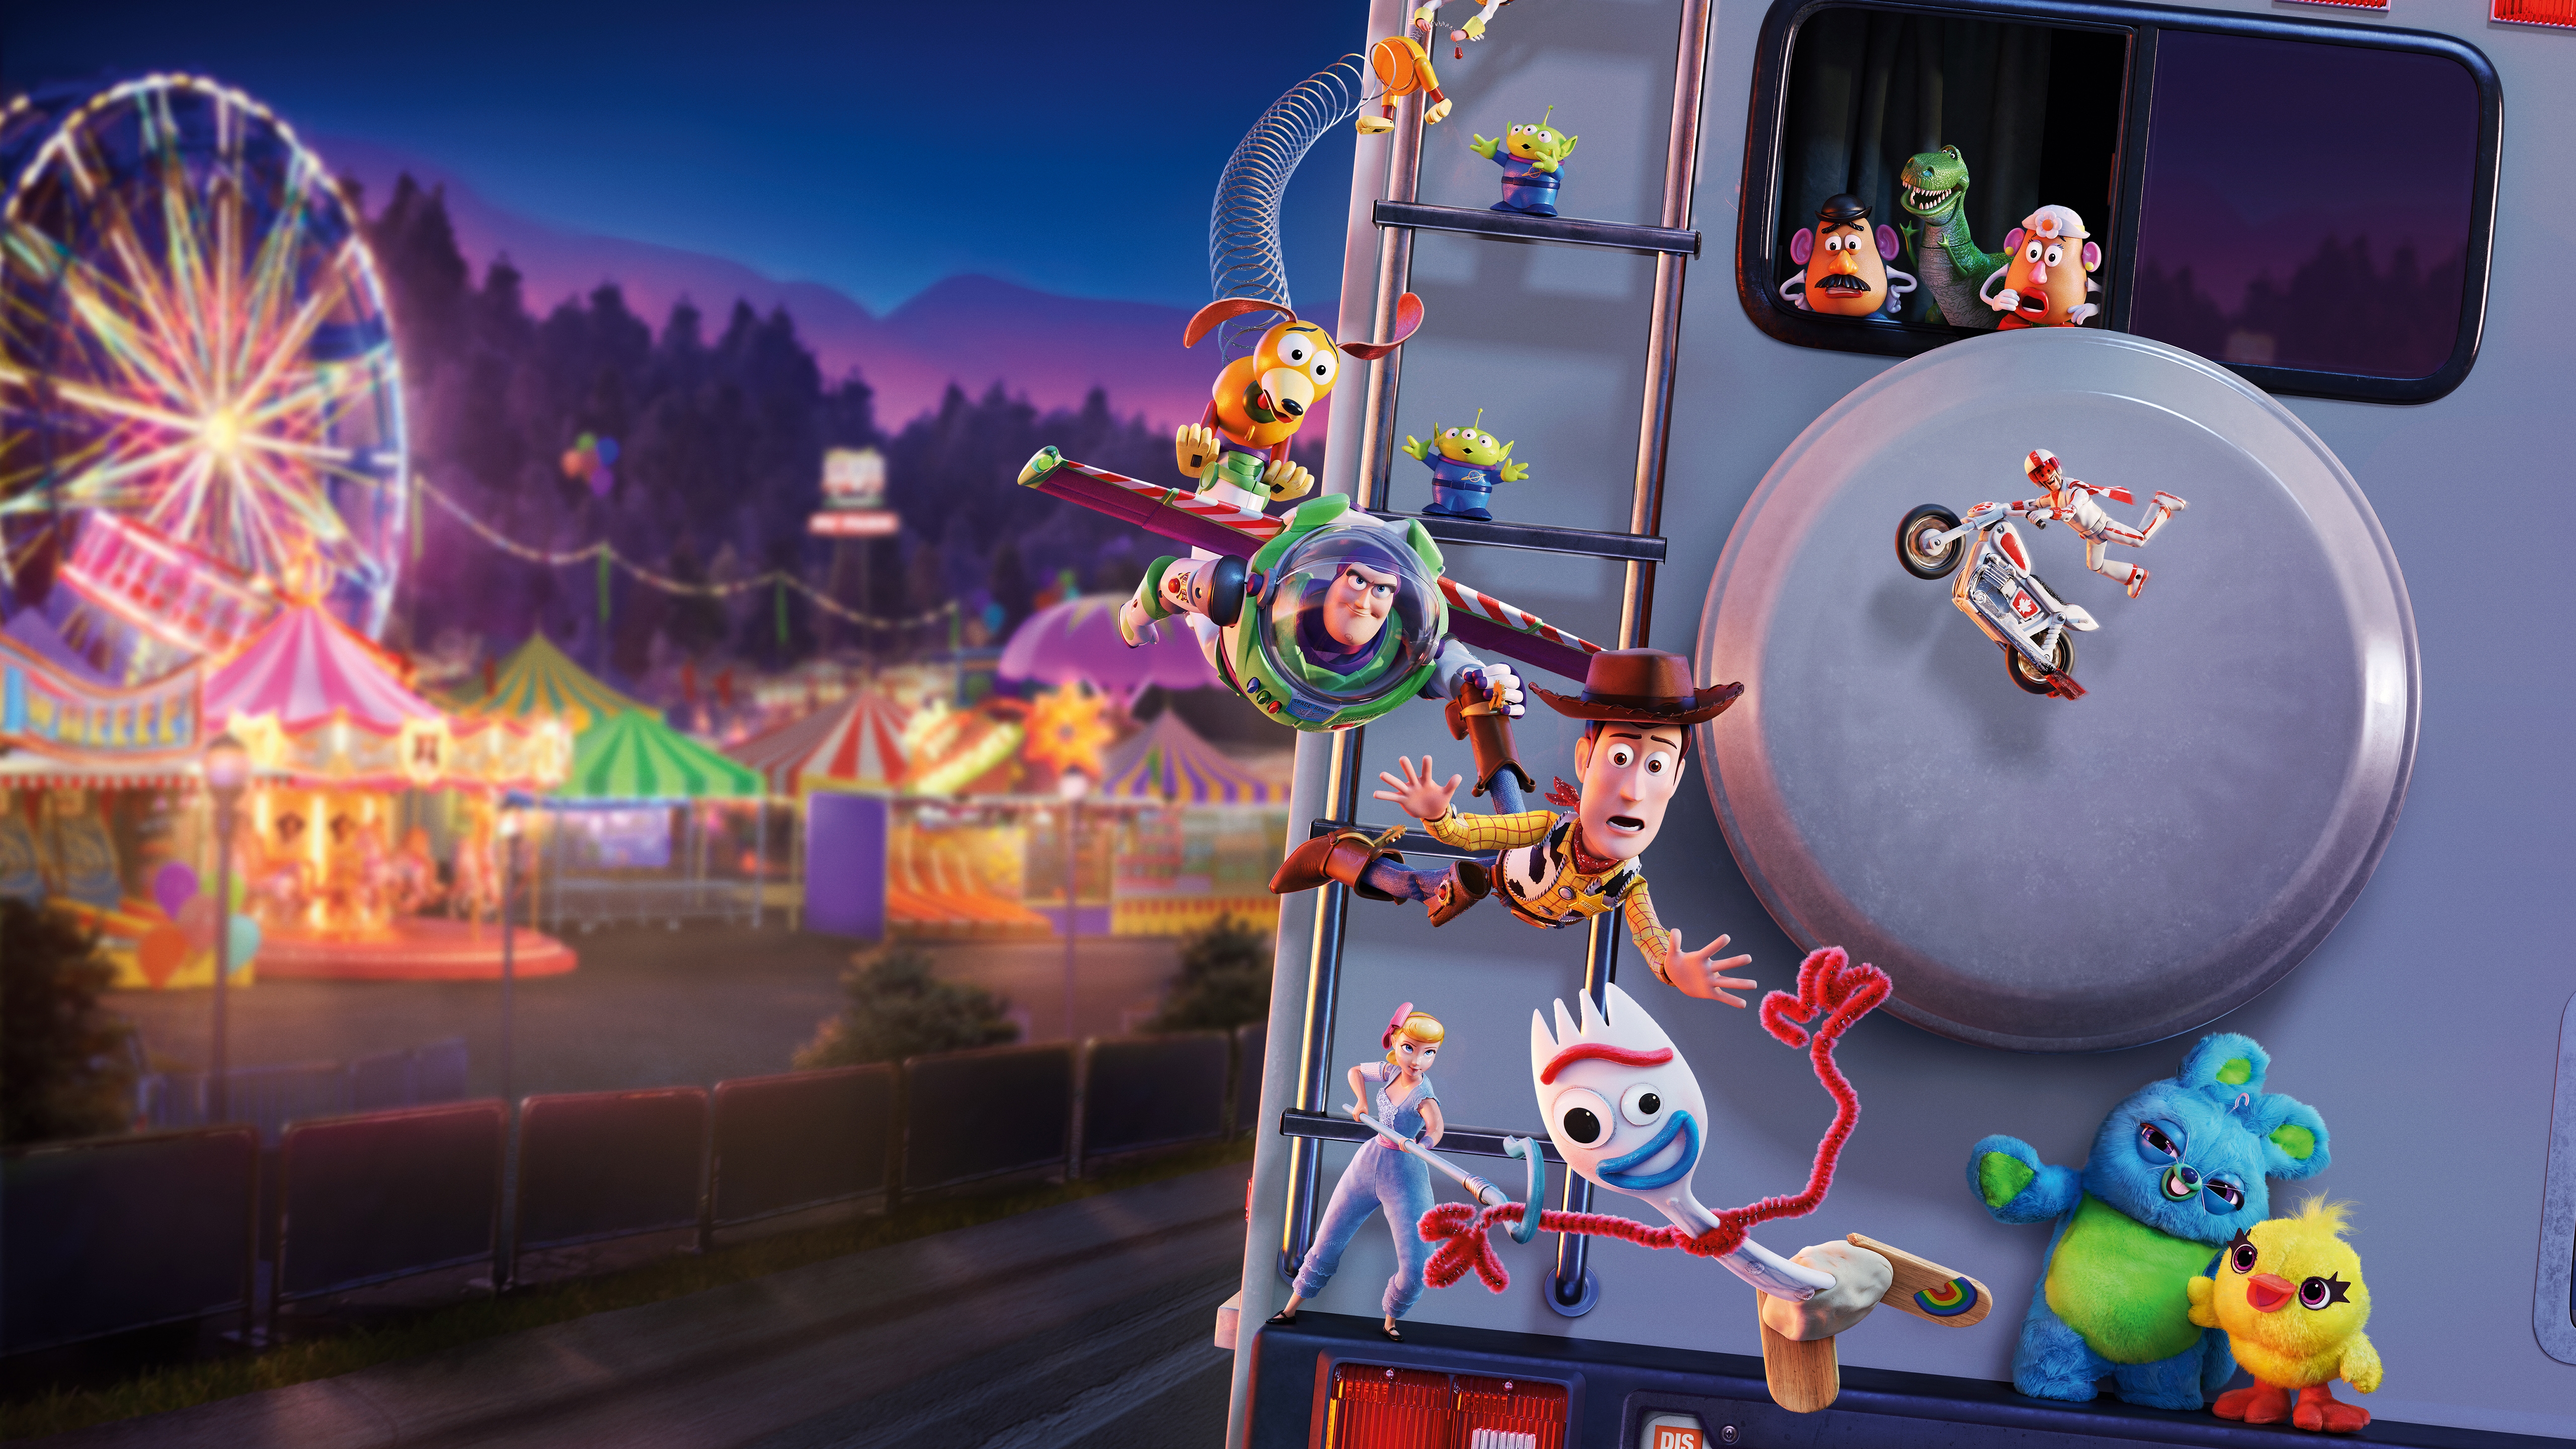 Wallpapers toy story 4 animation cartoons on the desktop